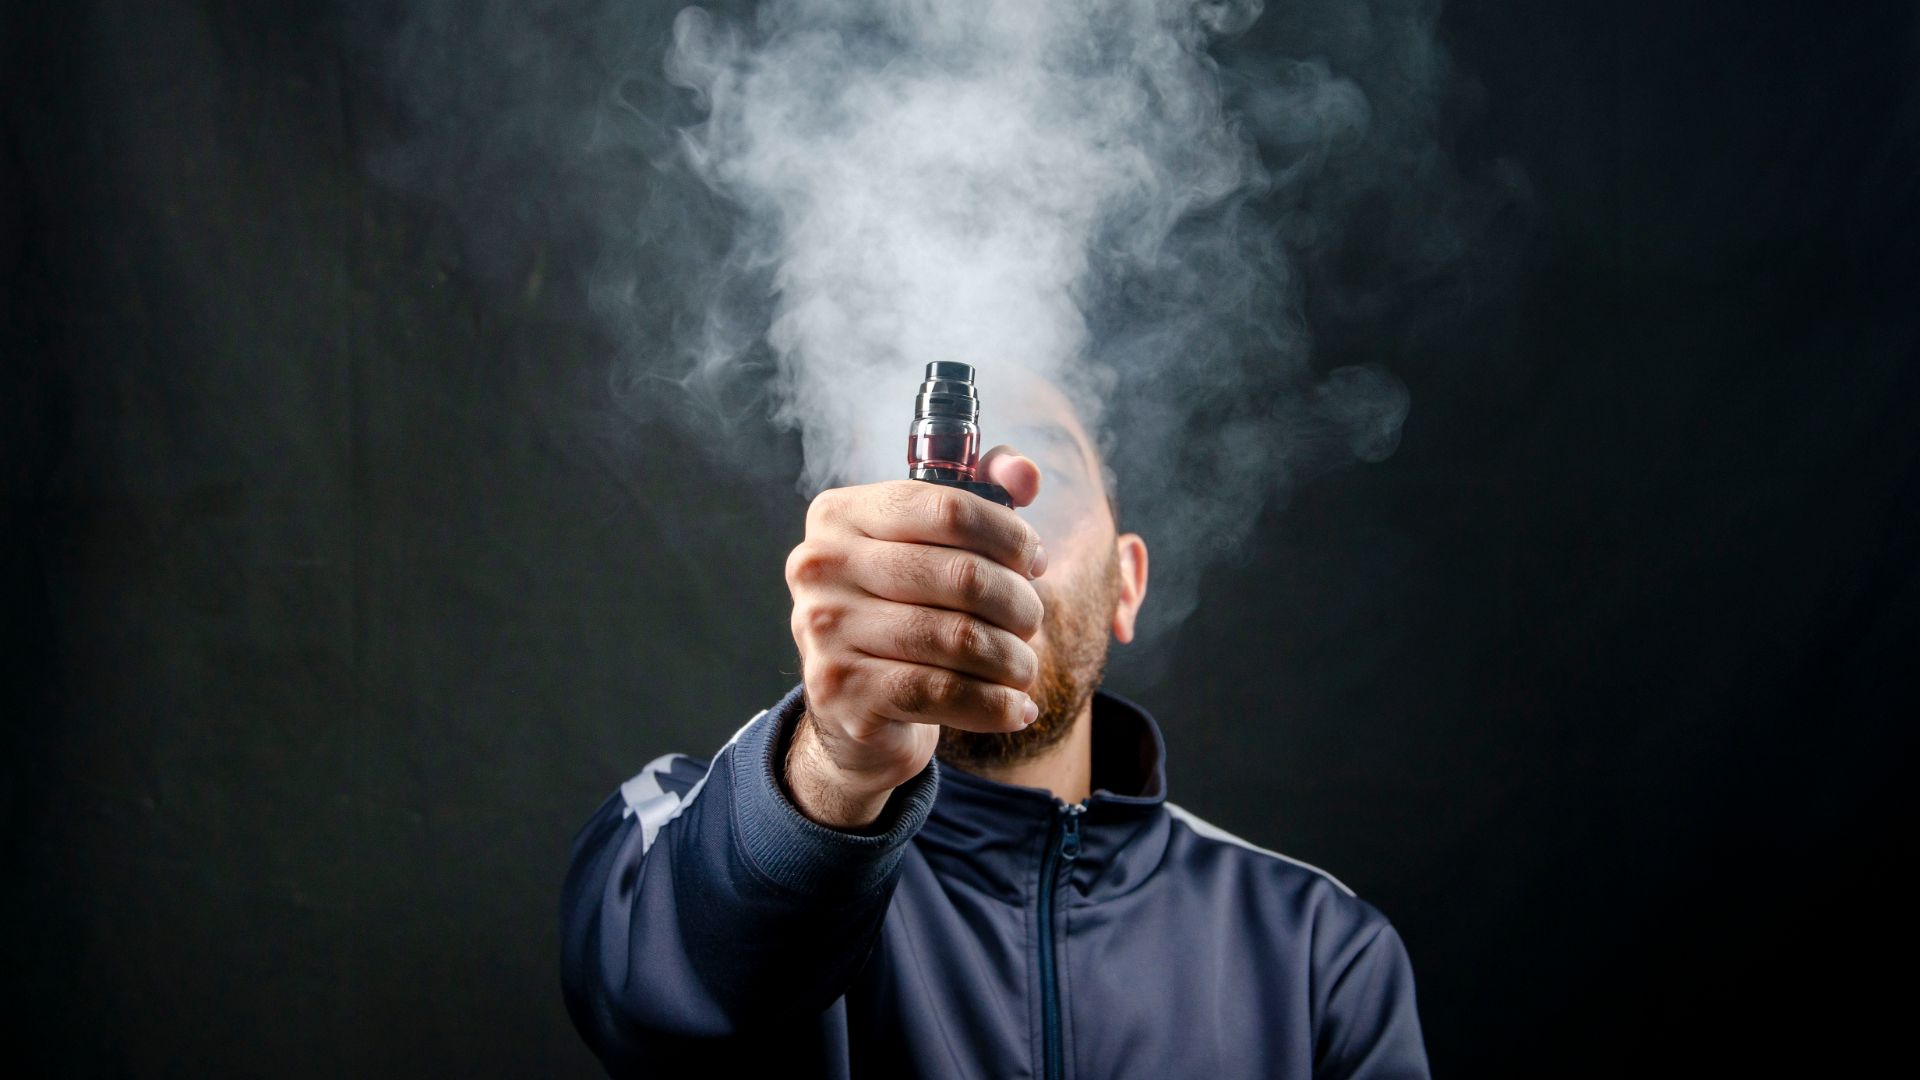 Vaping while driving could soon invalidate an insurance claim